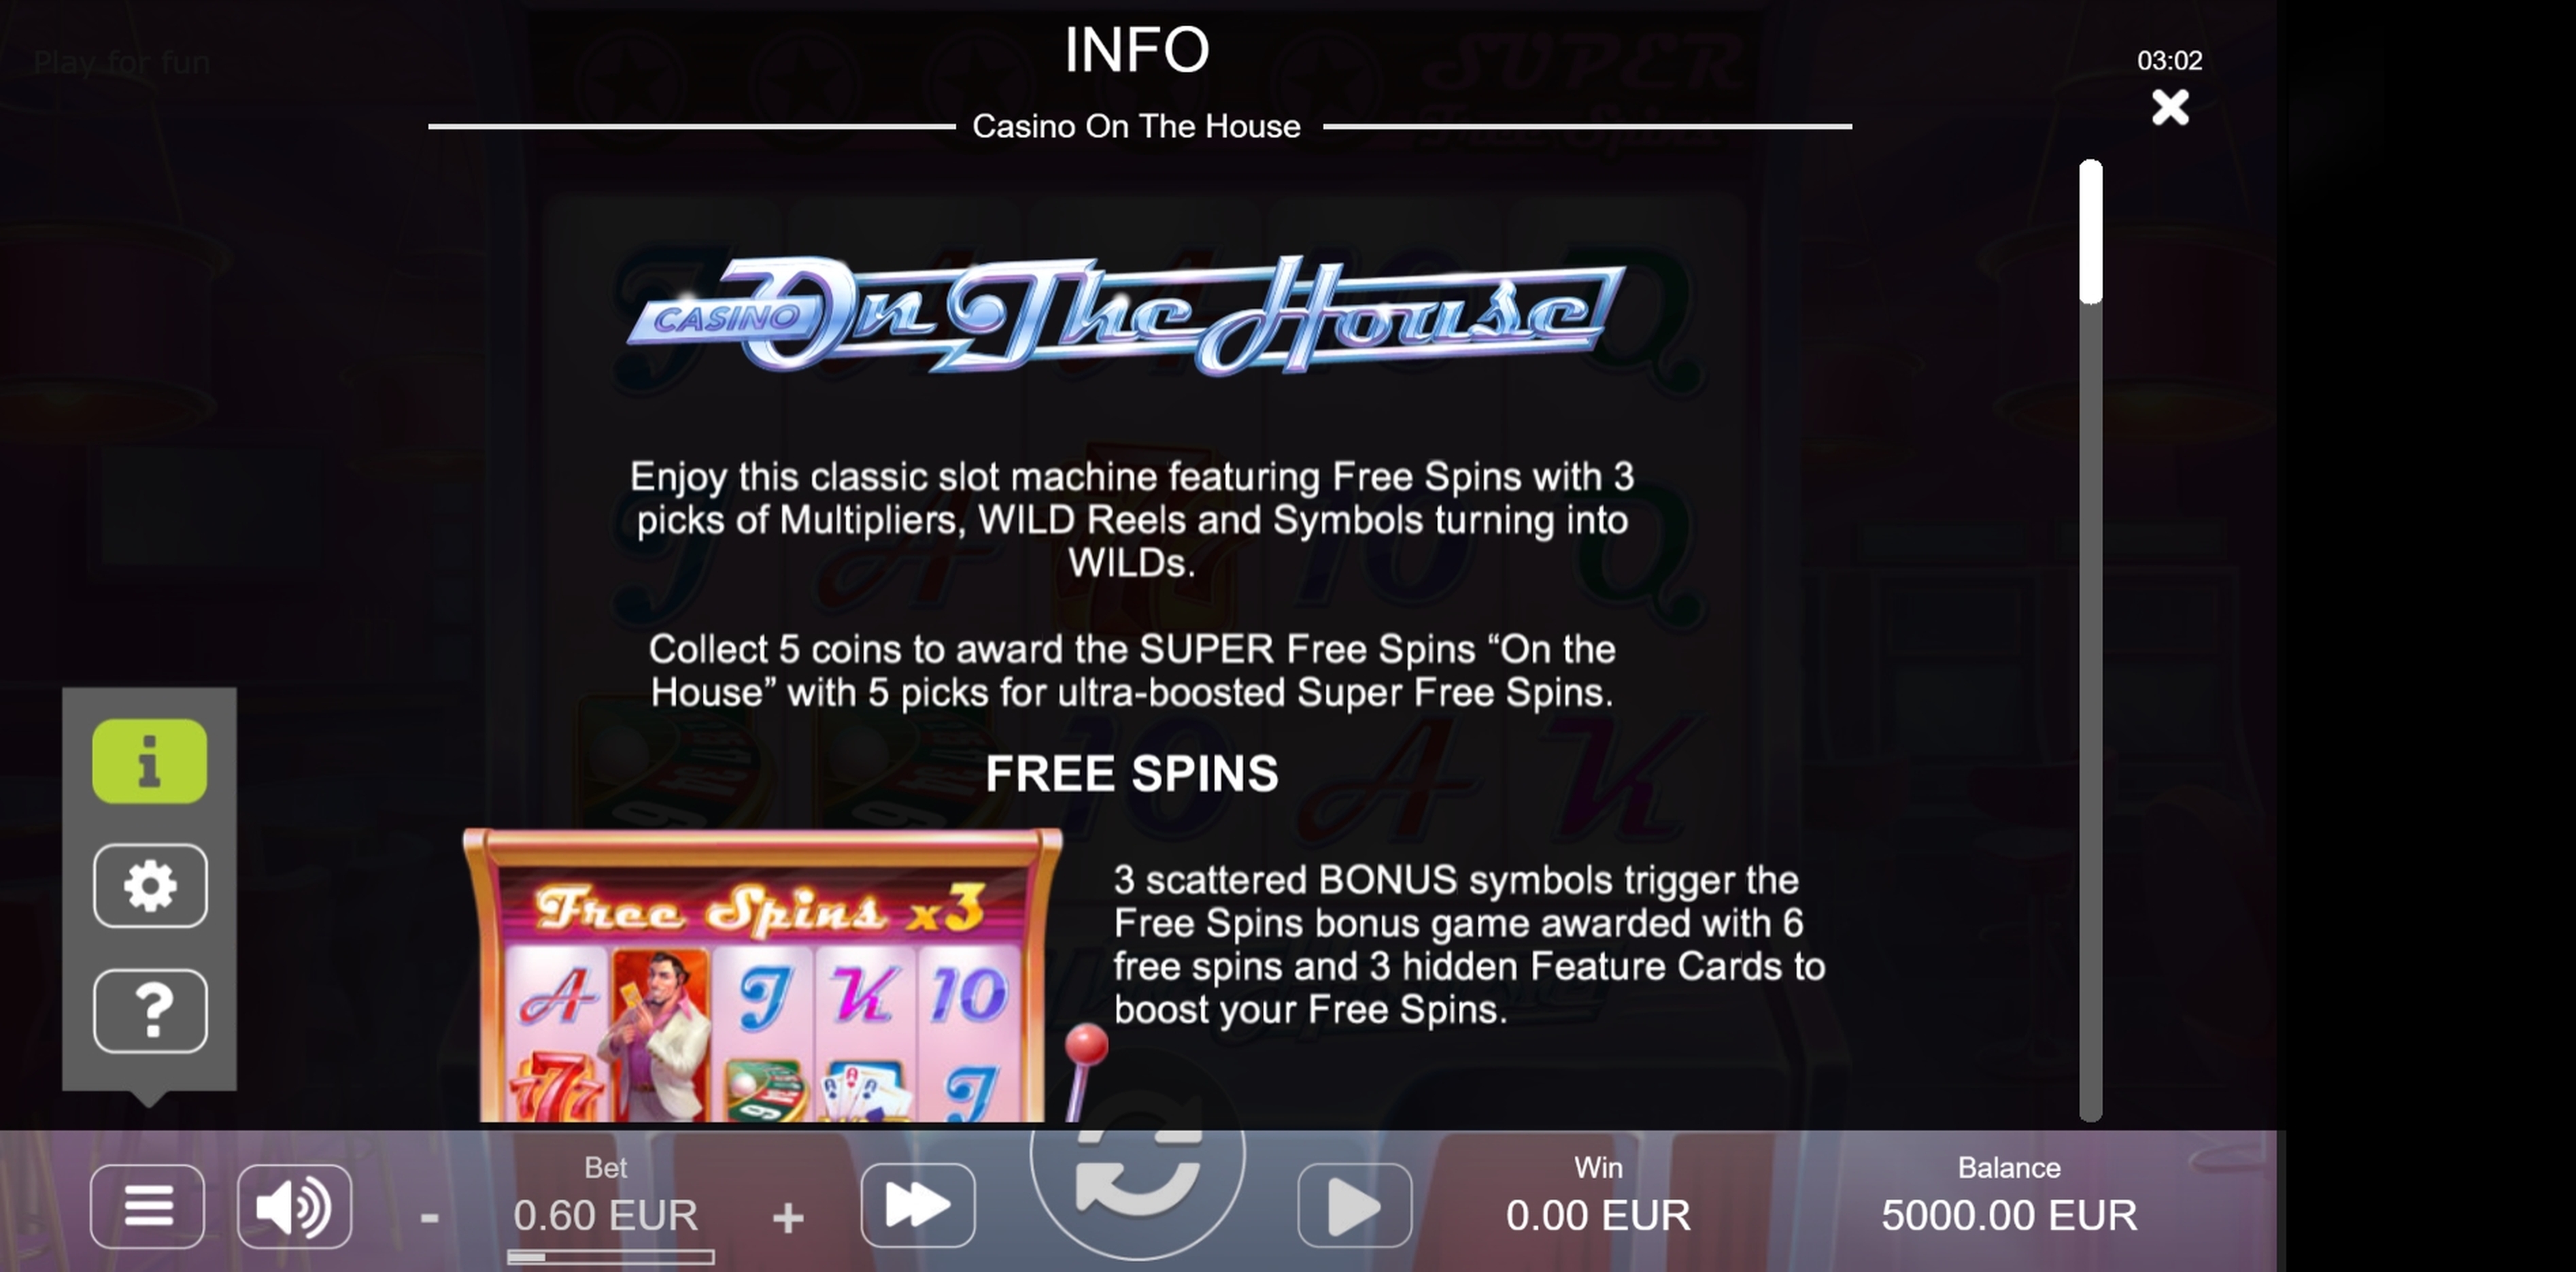 Info of Casino On the House Slot Game by STHLM Gaming